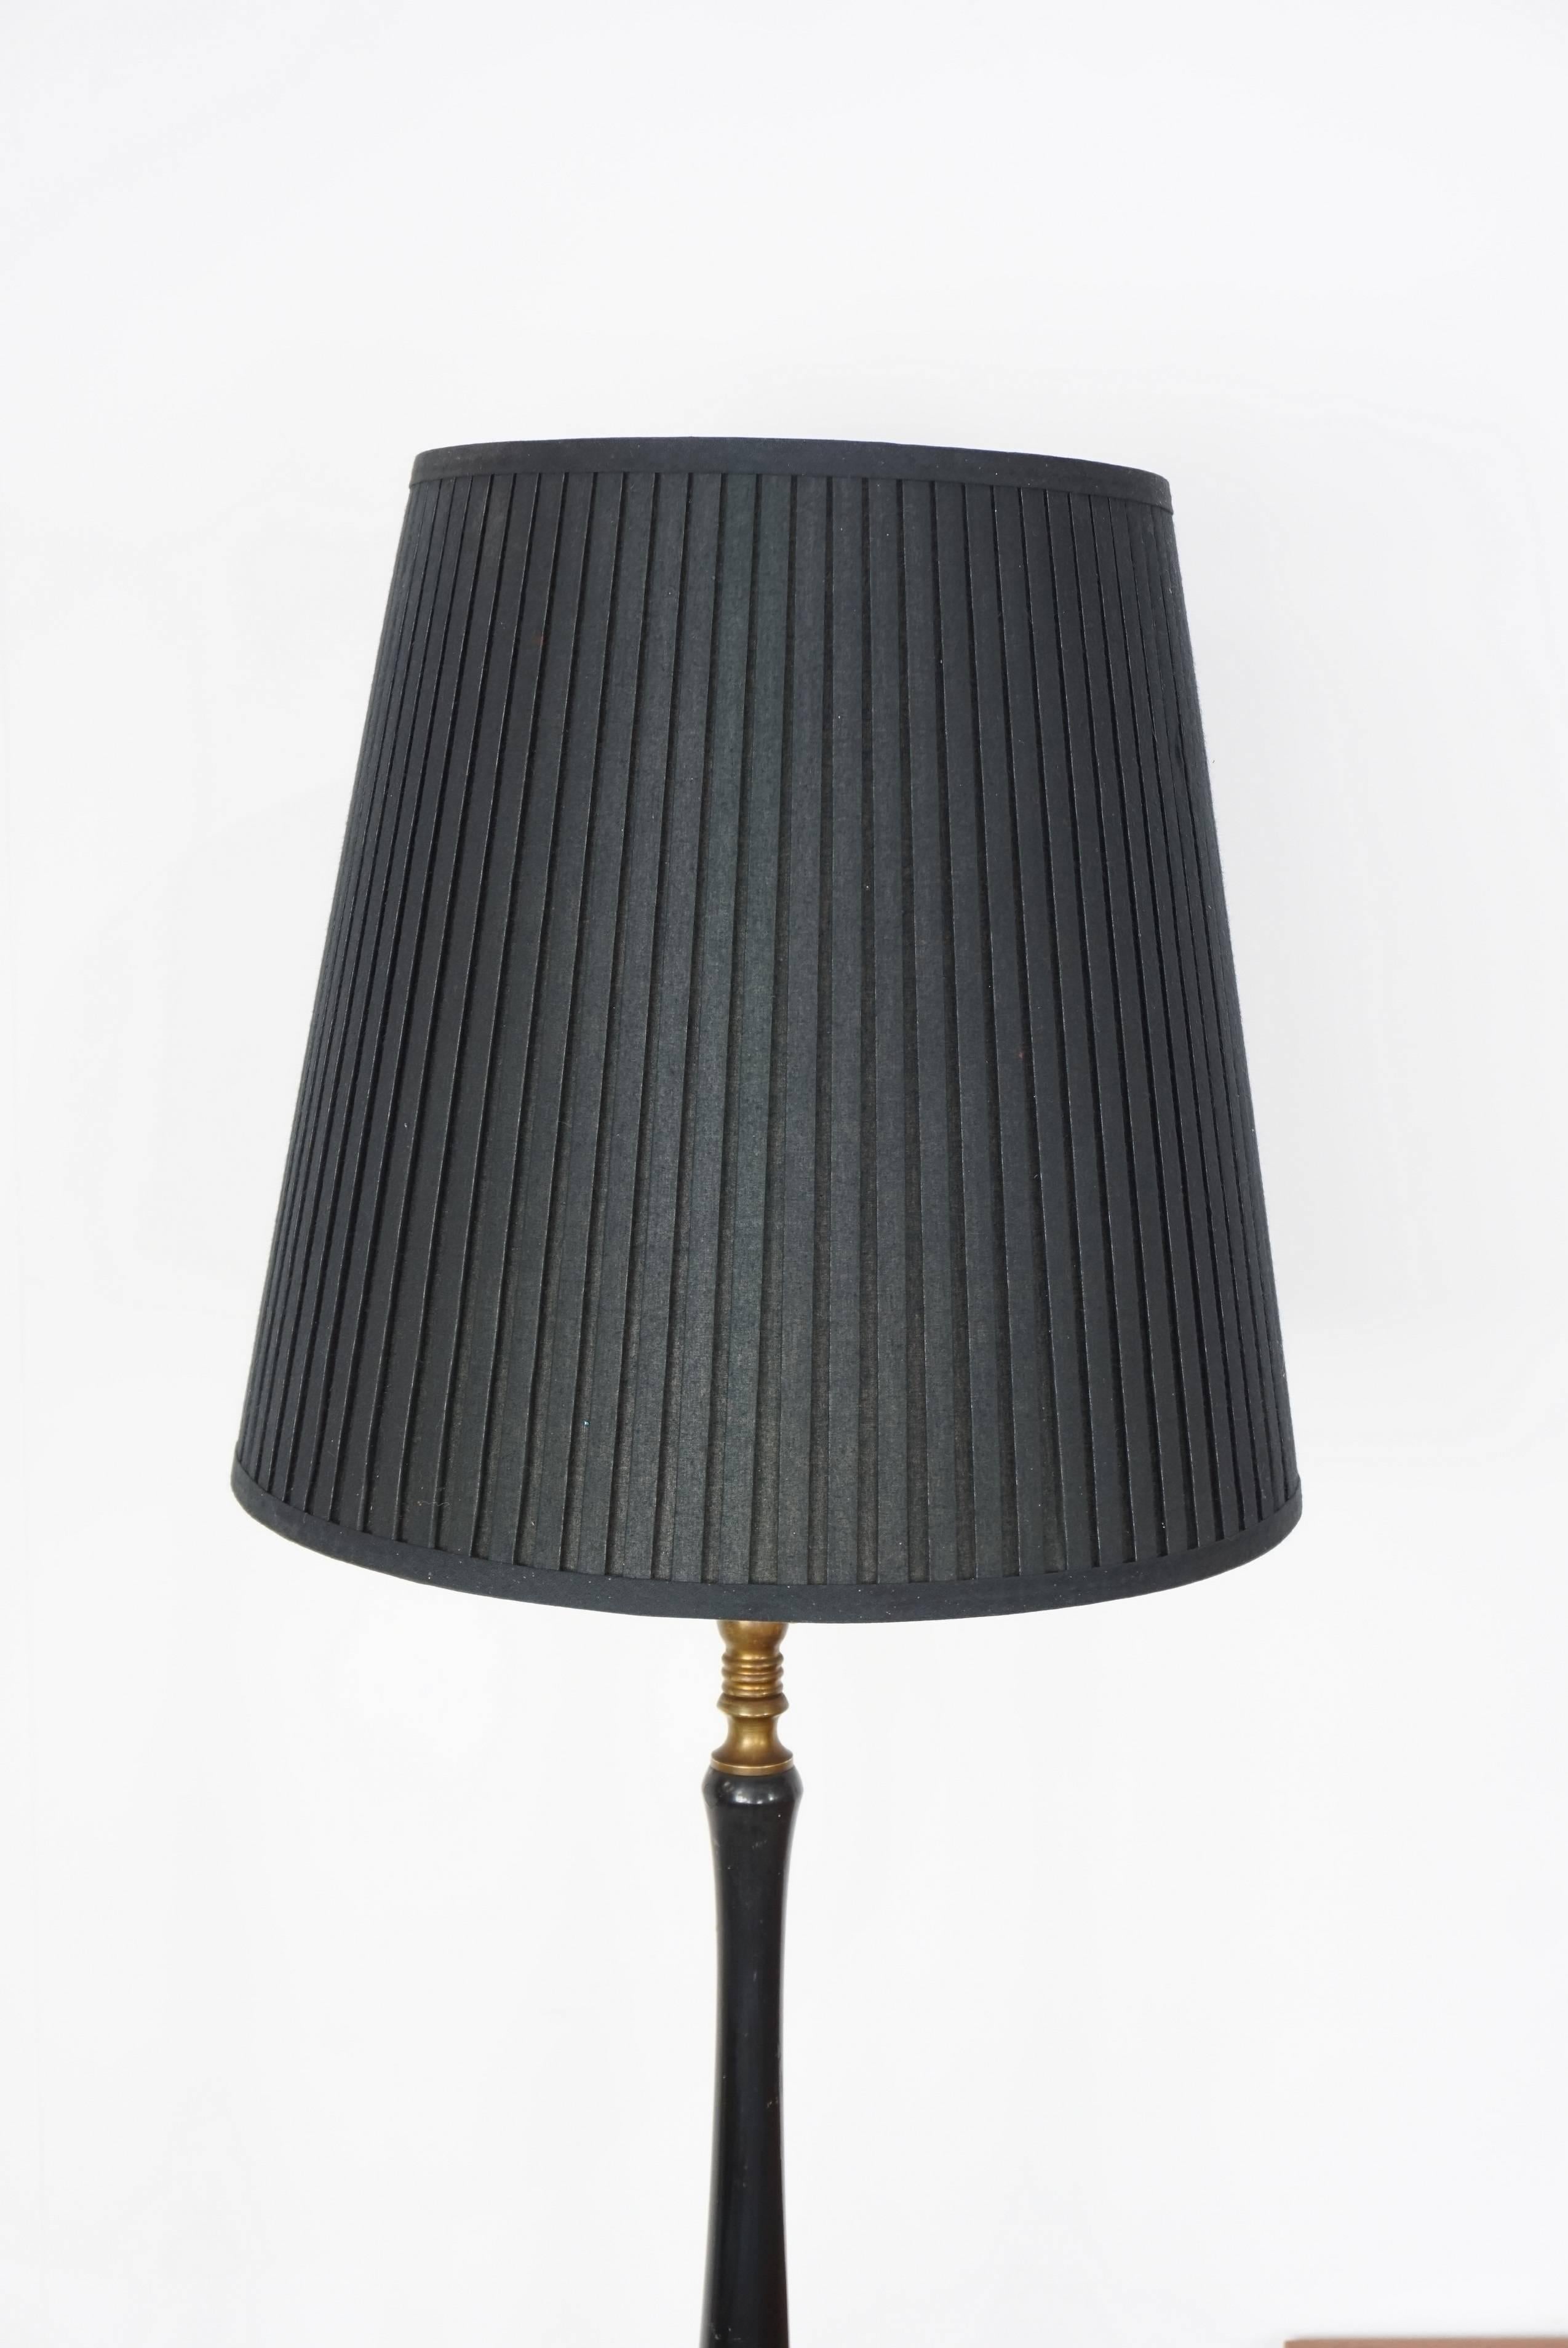 Floor lamp 50 years in lacquered wood and brass, slim, with sober lines it is adjustable in height.
 